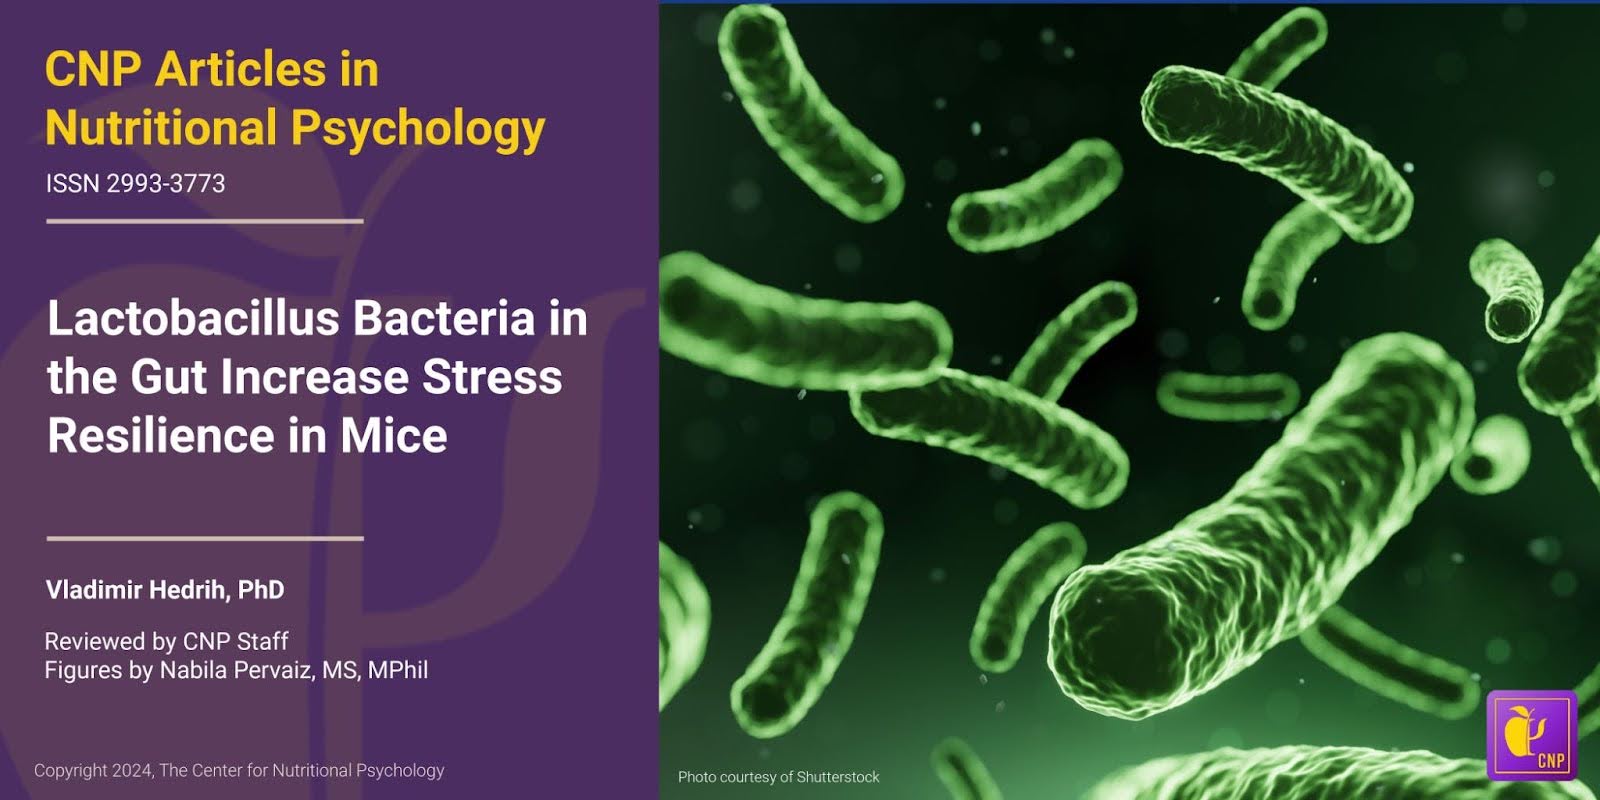 Lactobacillus Bacteria in the Gut Increase Stress Resilience in Mice